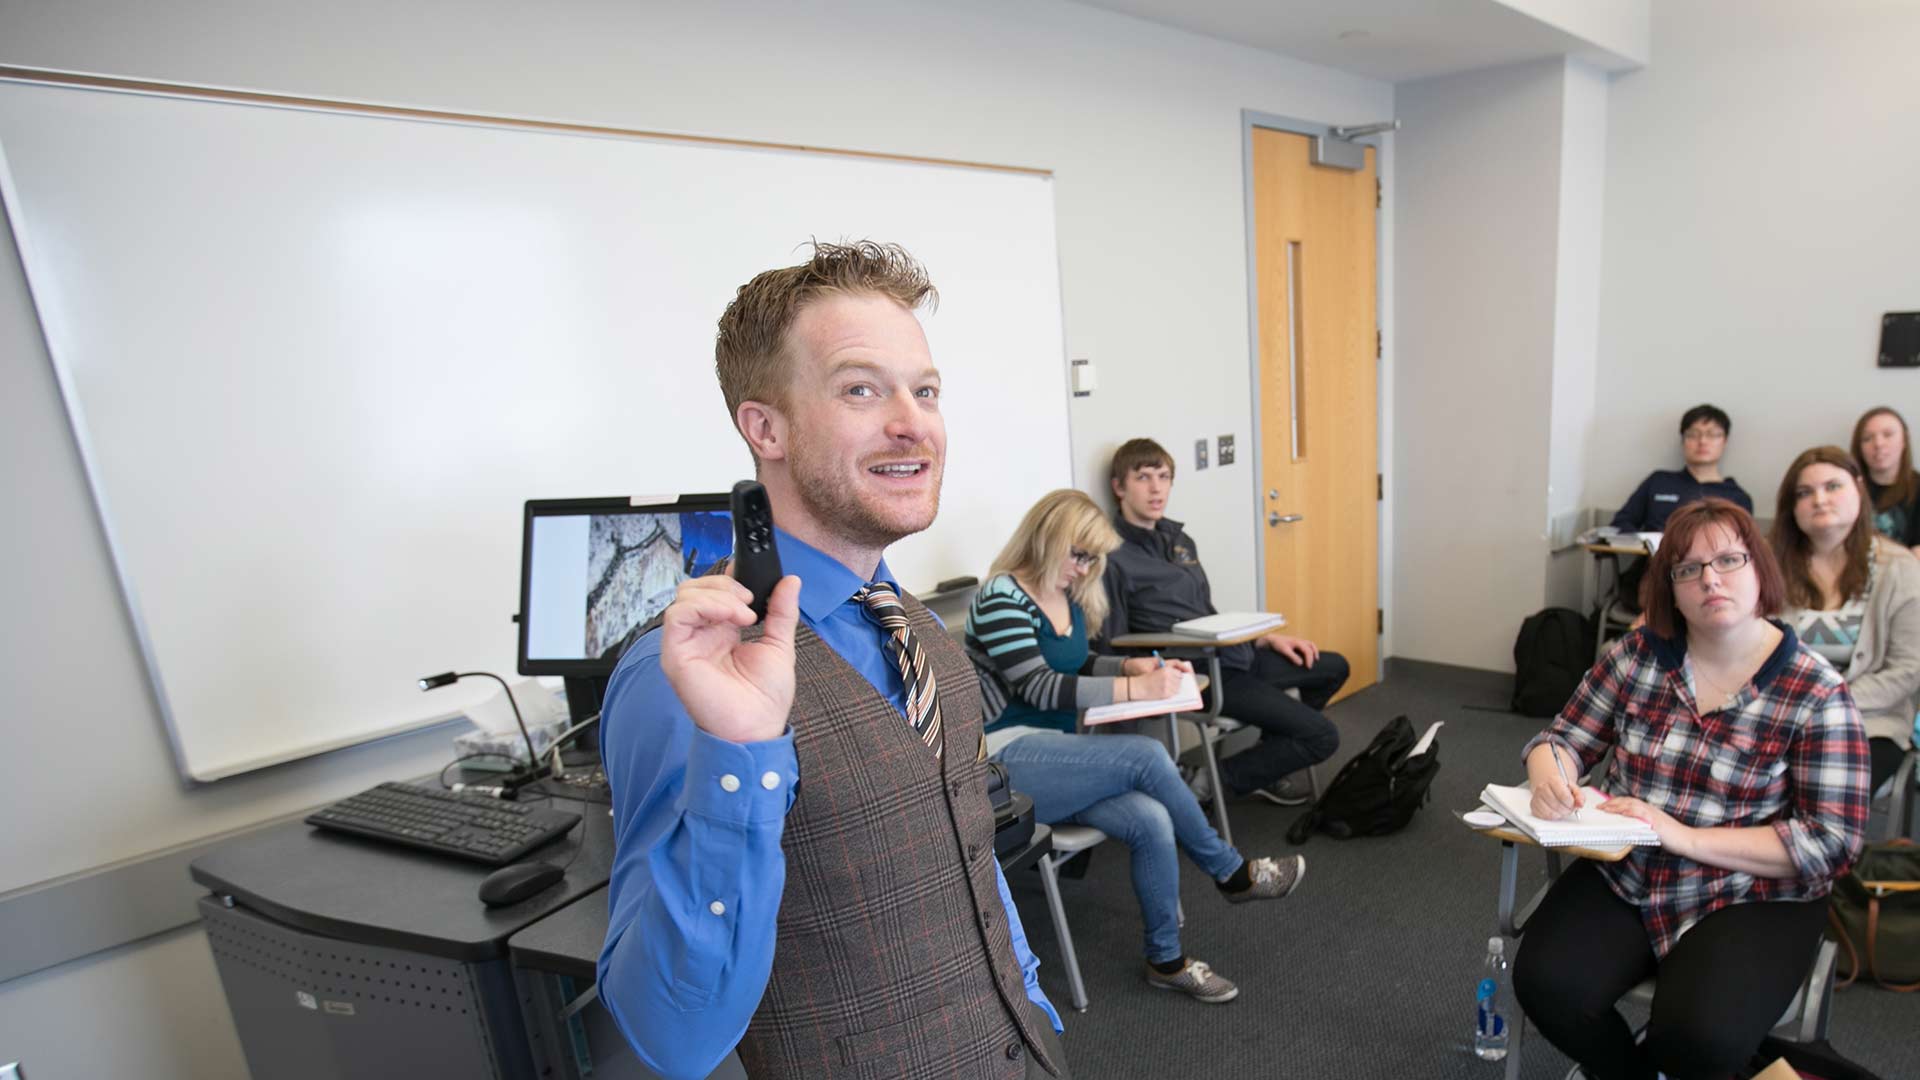 Dr. William Hardwood, Assistant Professor in the Political Science and Philosophy Department, teaches a class.